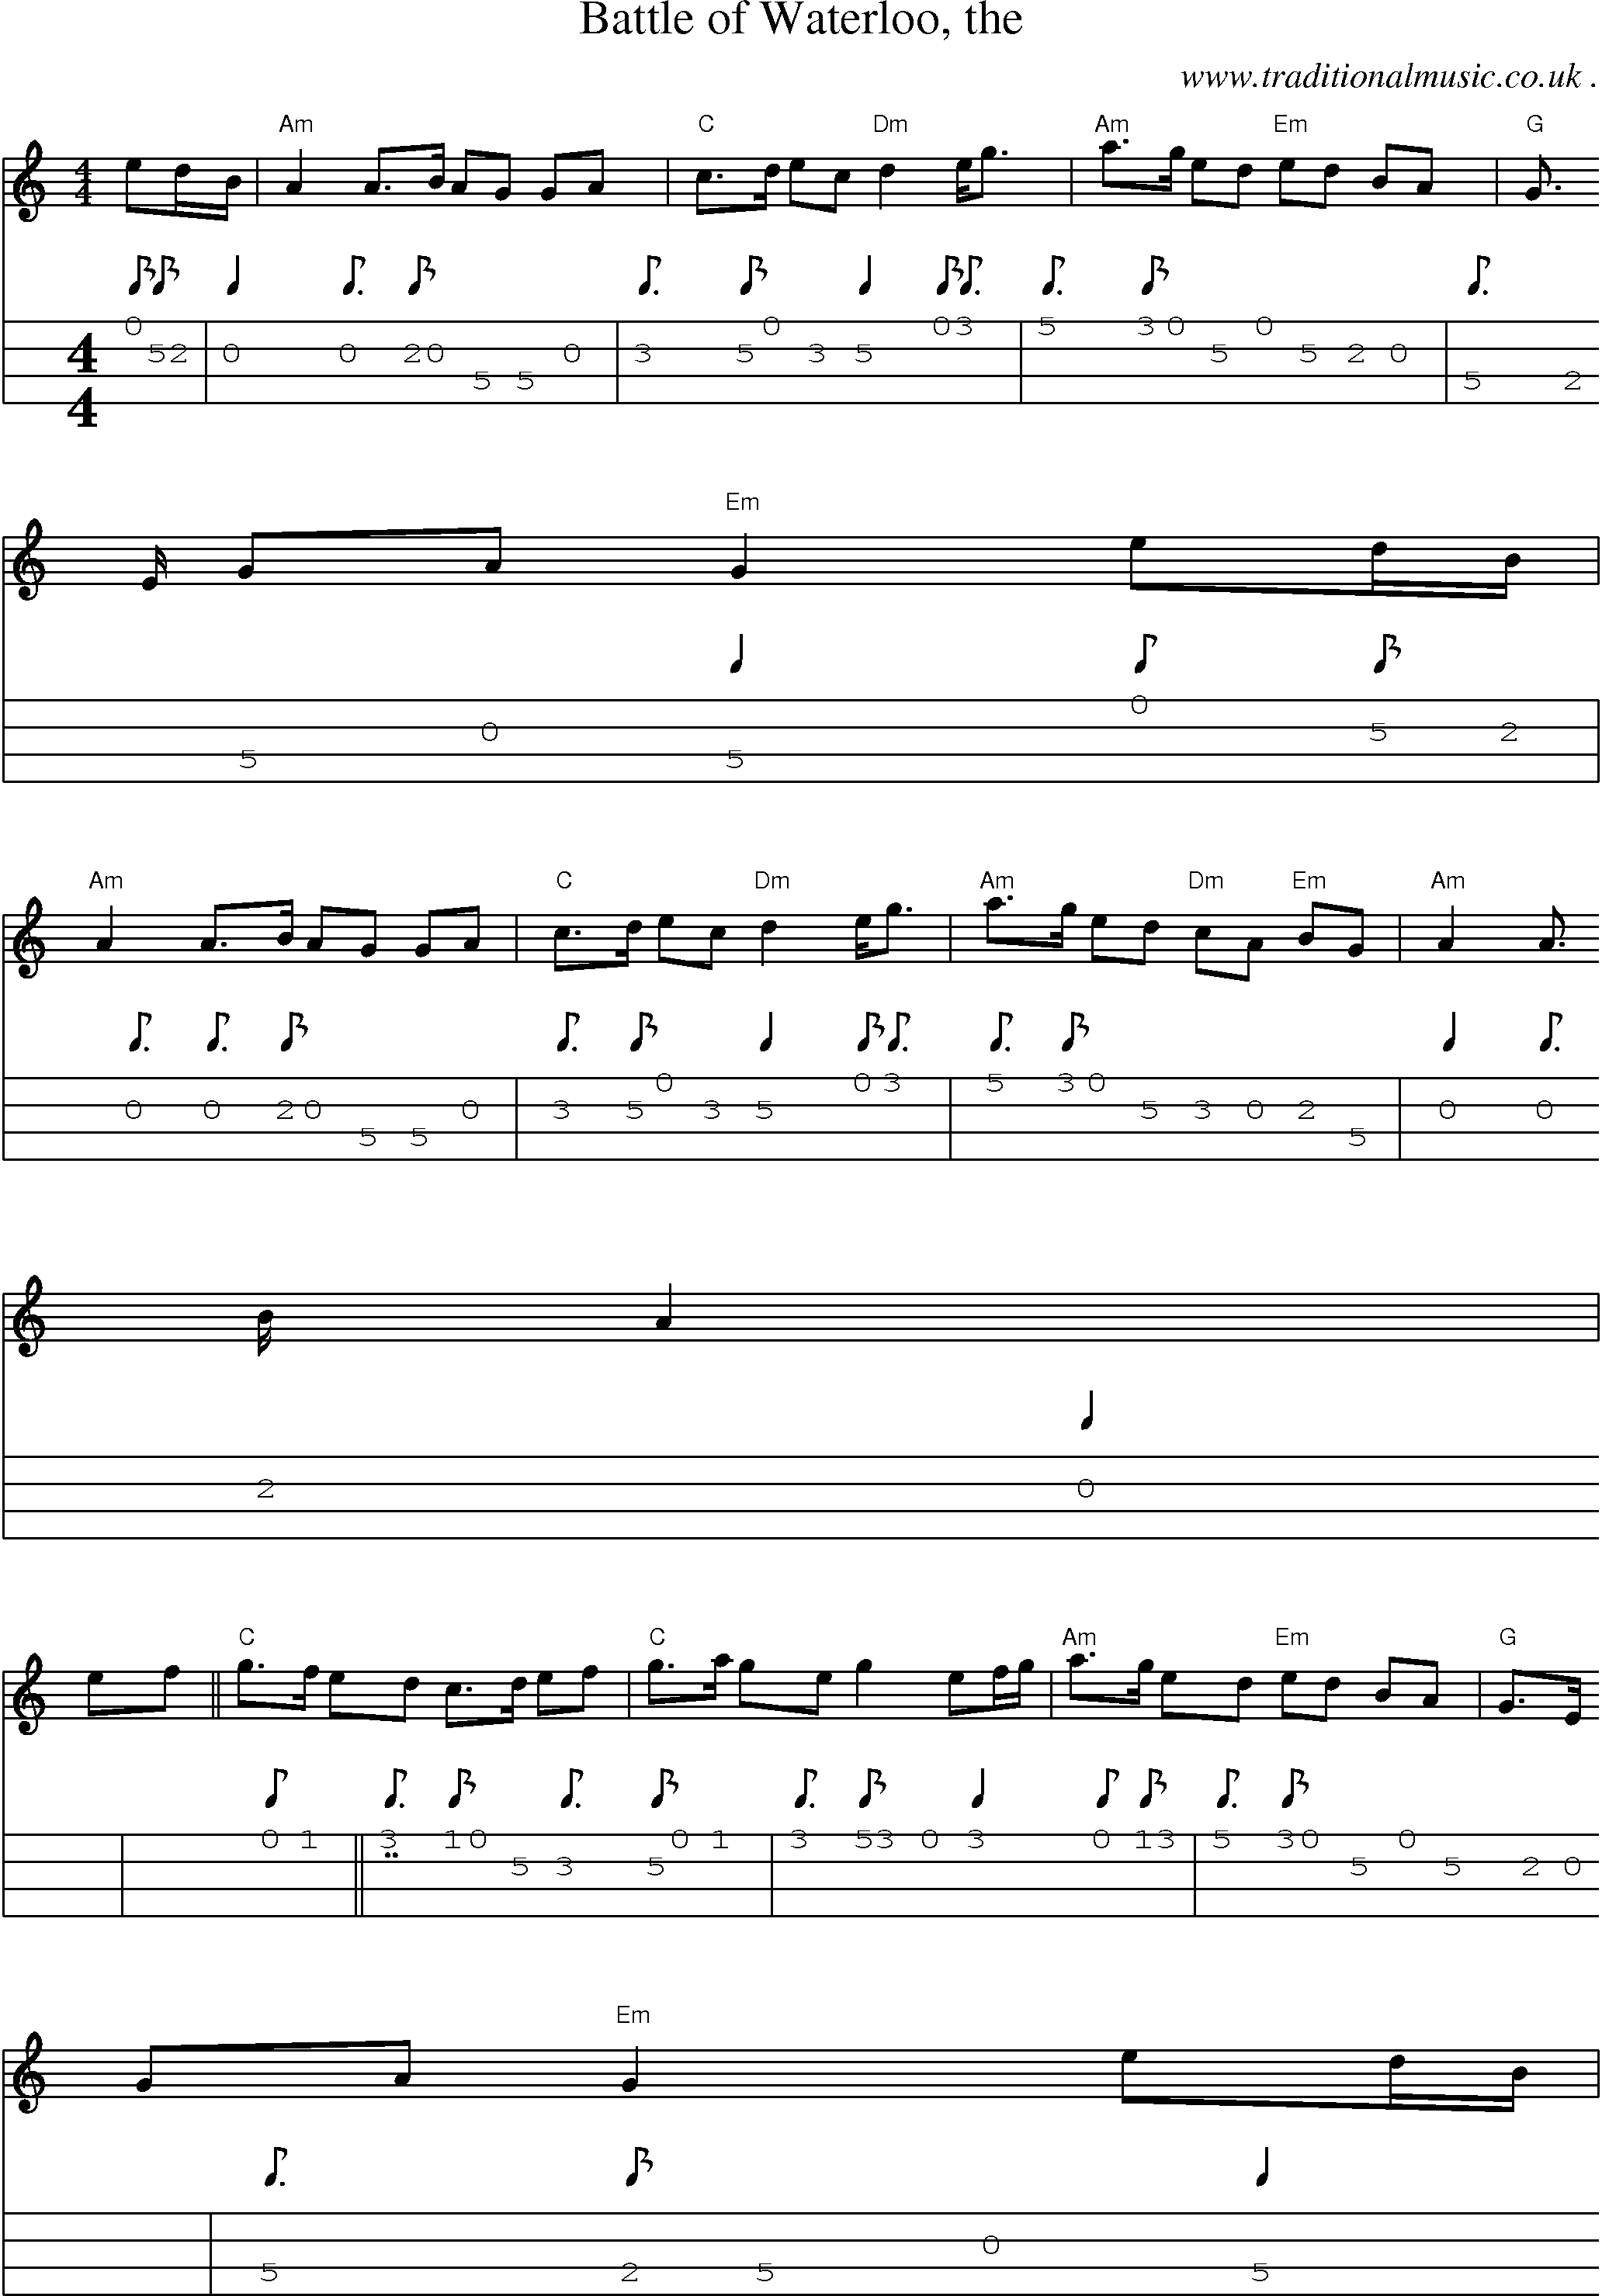 Sheet-music  score, Chords and Mandolin Tabs for Battle Of Waterloo The